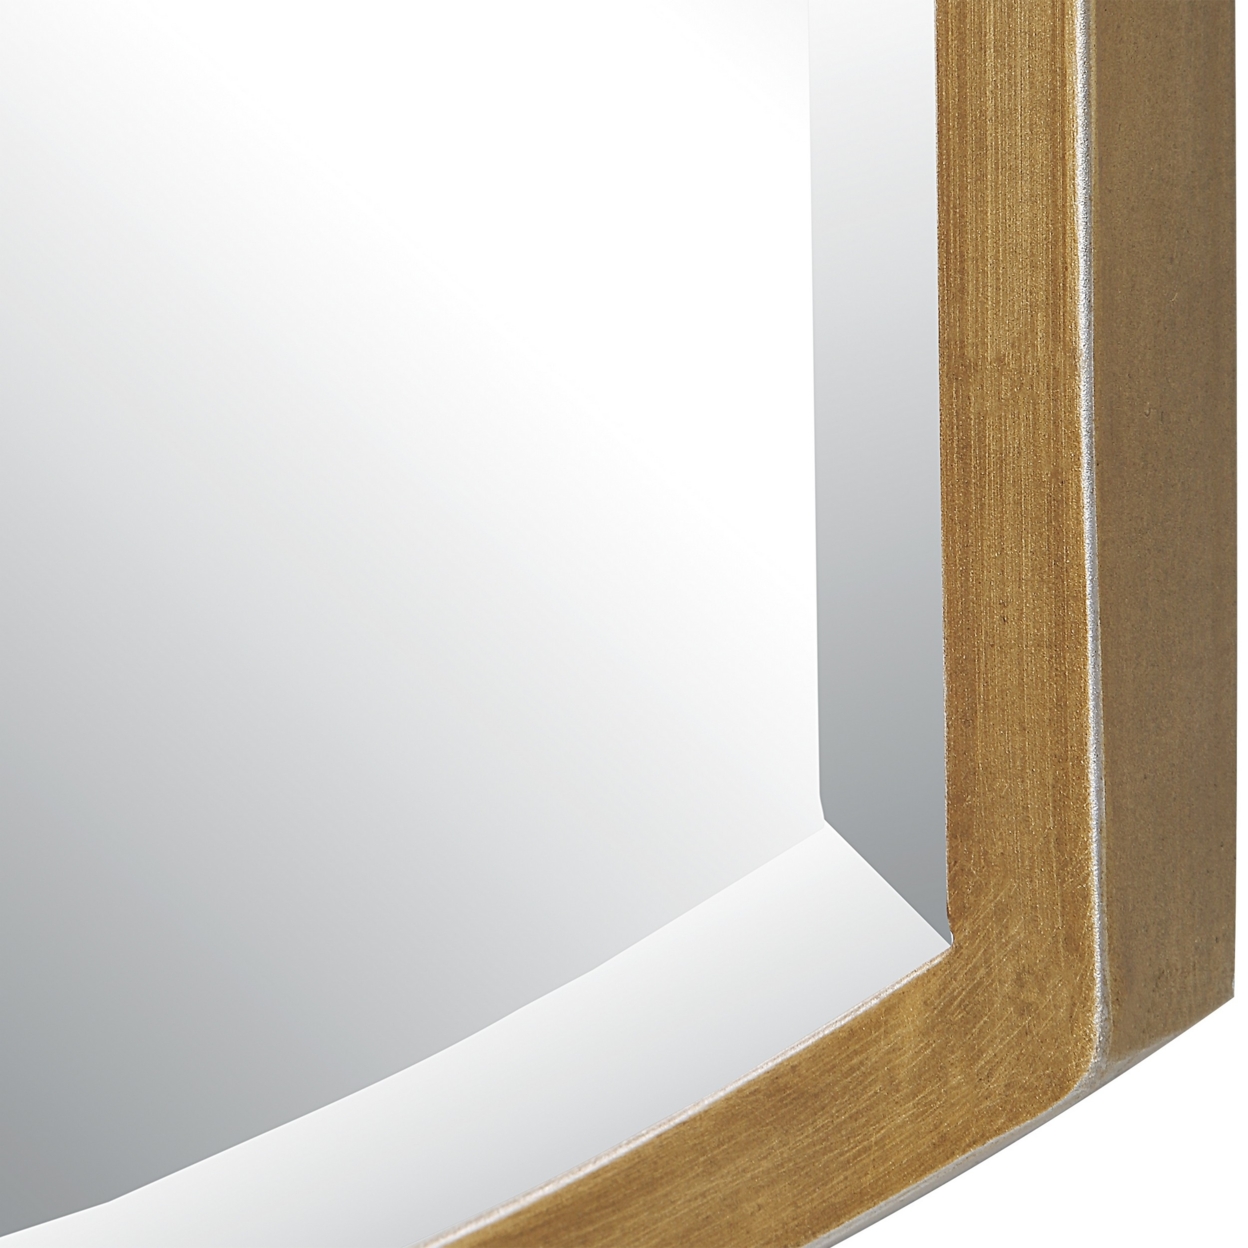 22 X 35 Modern Rectangular Mirror With Arches And Bevels, Gold, Silver- Saltoro Sherpi